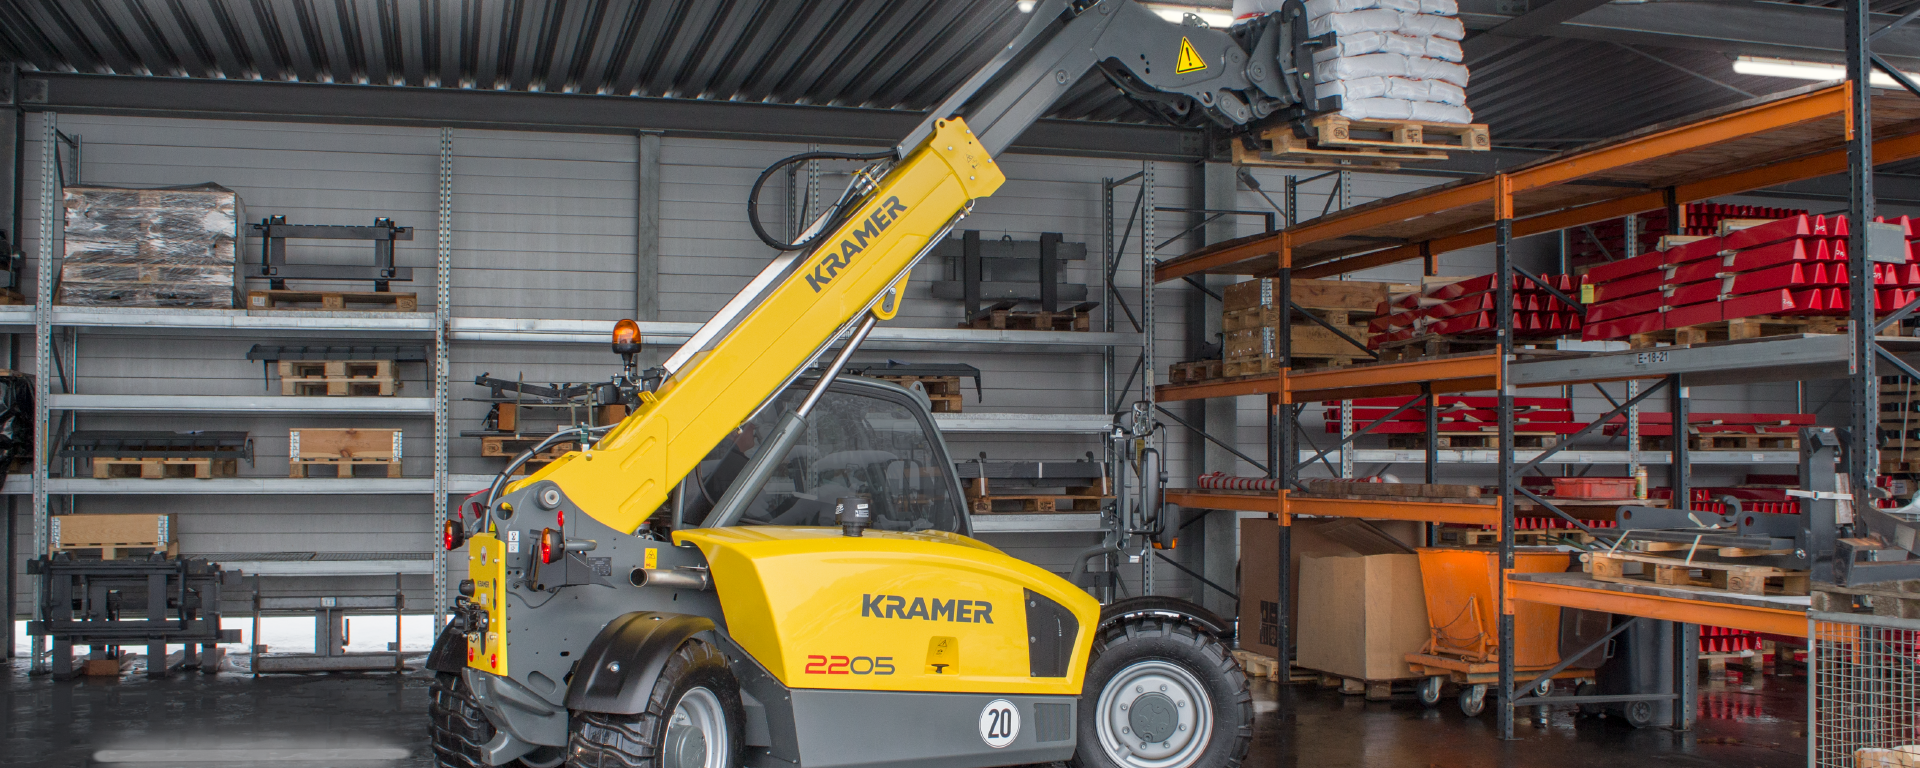 The Kramer telehandler 2205 while working with a pallet.